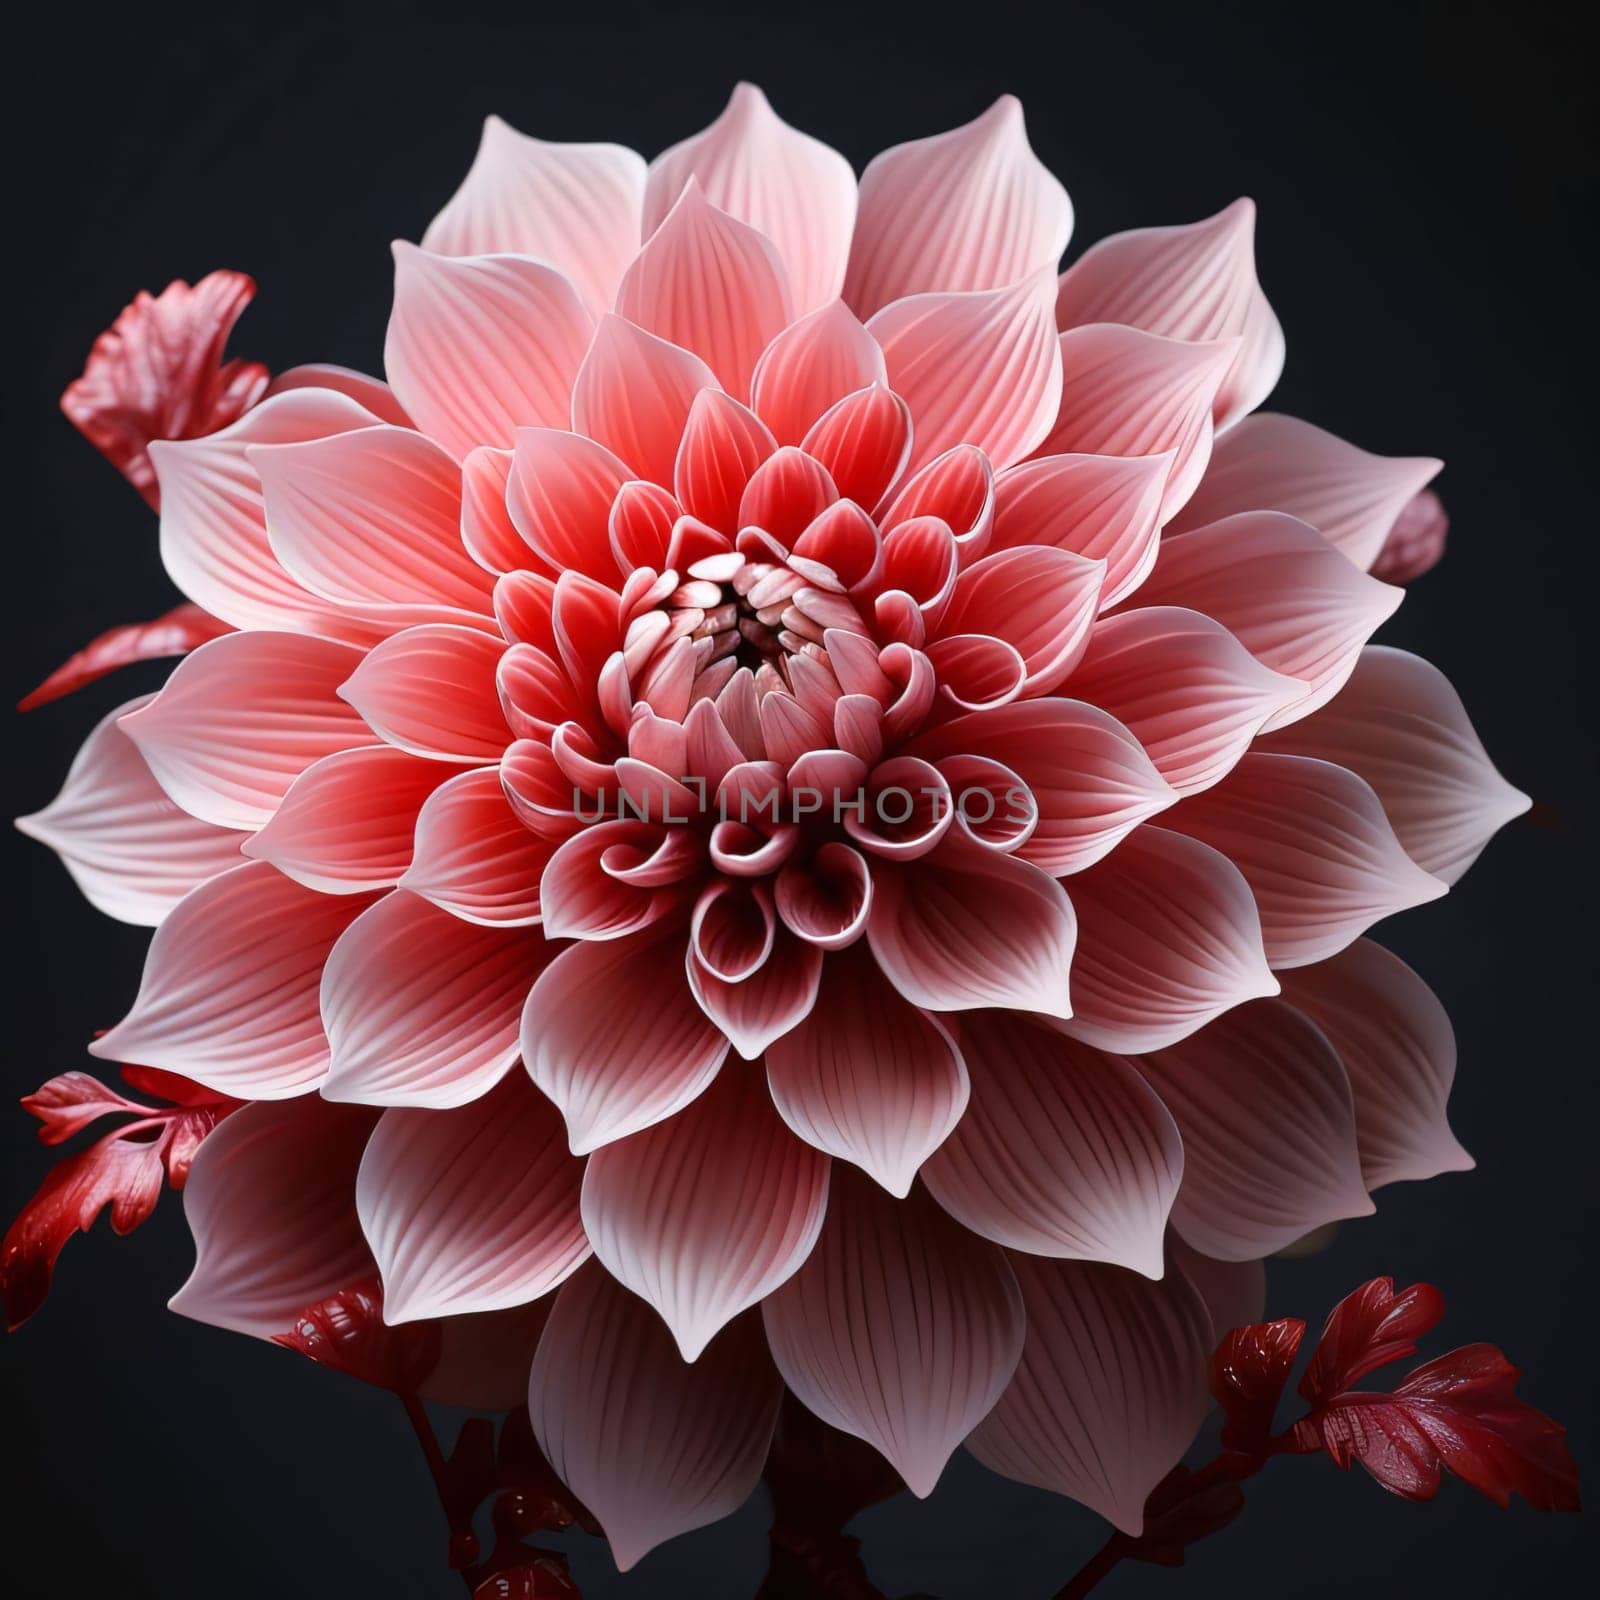 Pink and white dahlia on black background. Flowering flowers, a symbol of spring, new life. A joyful time of nature waking up to life.